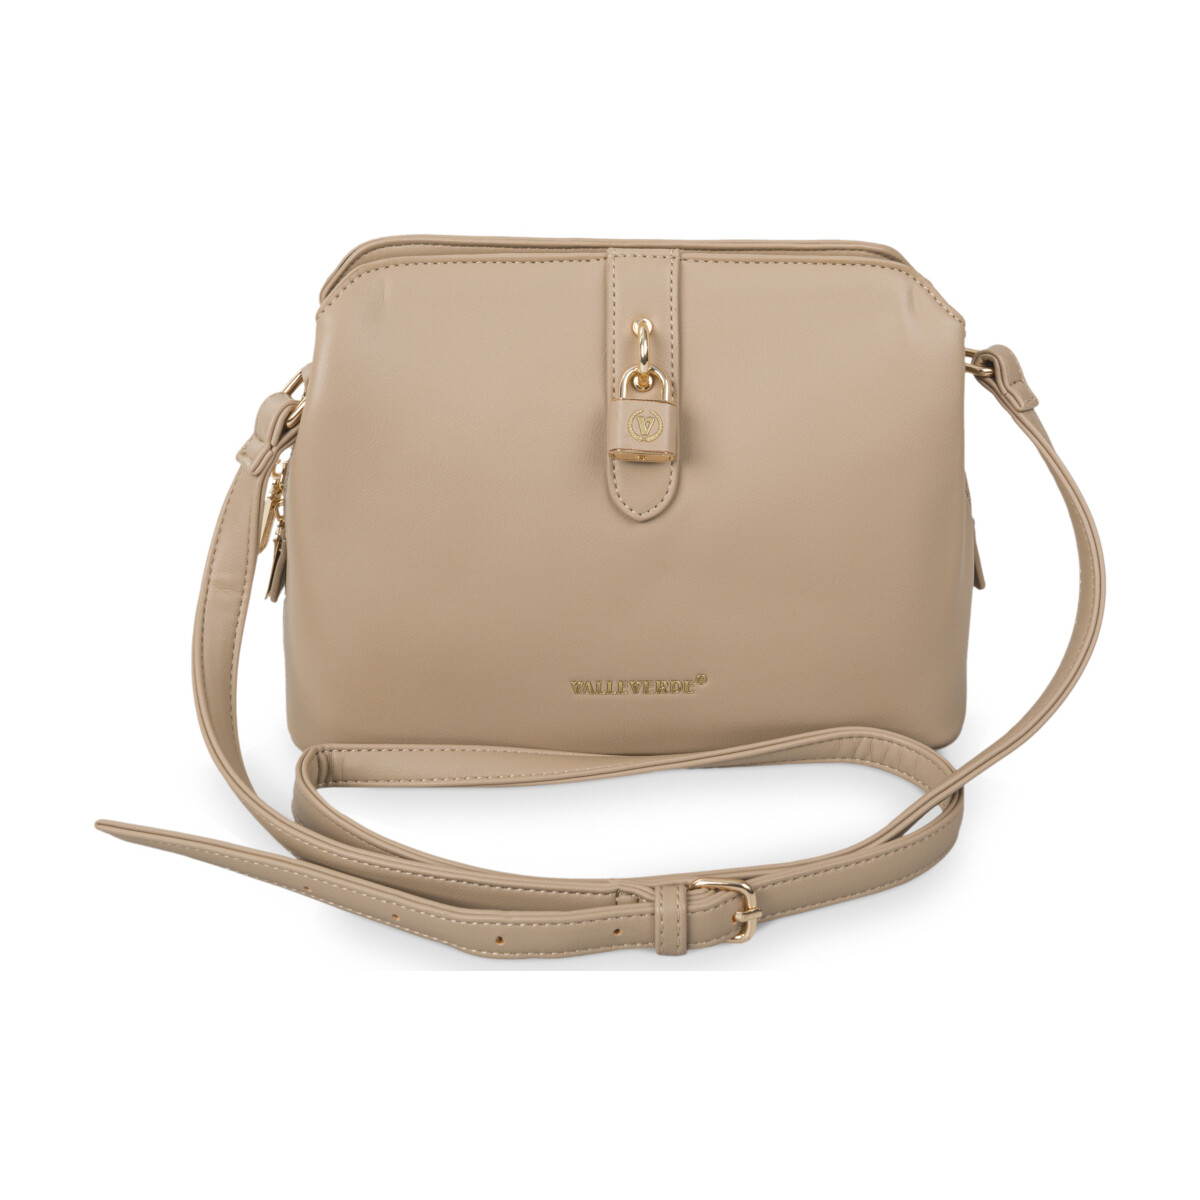 Borse Donna Tracolle Valleverde 96150-Taupe Beige